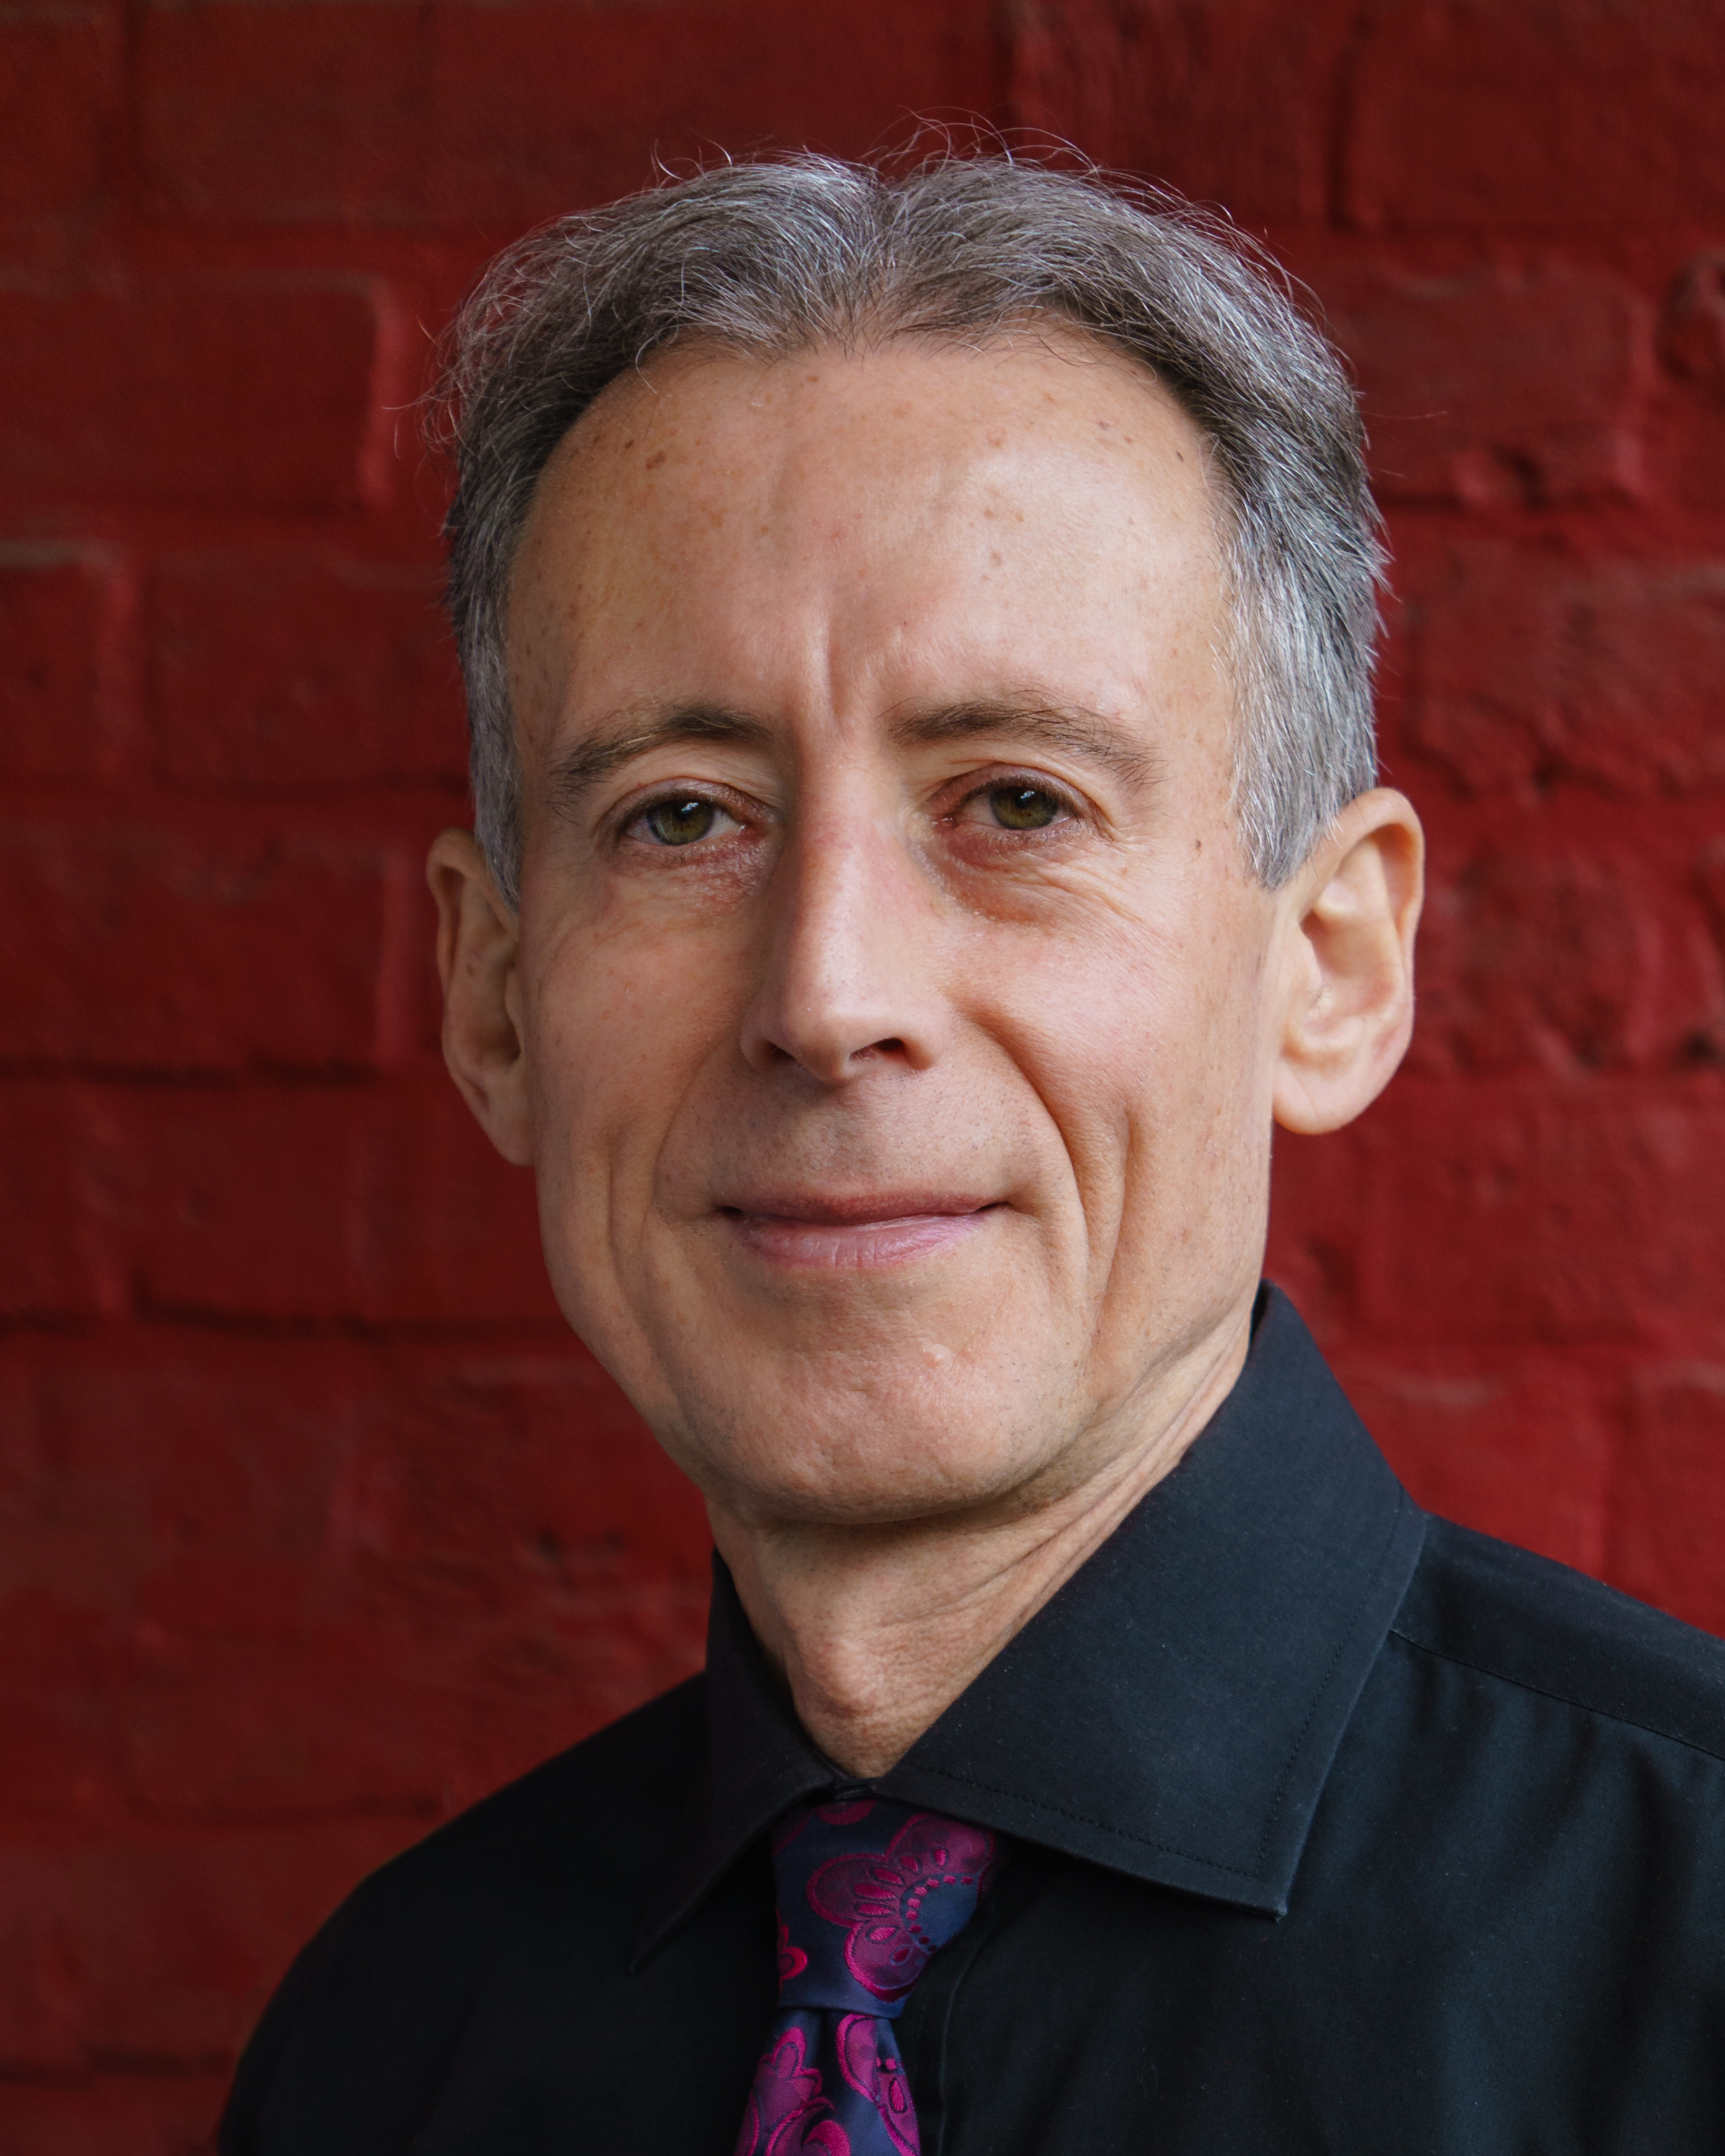 Peter_Tatchell_-_Red_Wall_-_8by10_-_2016-10-15.jpg